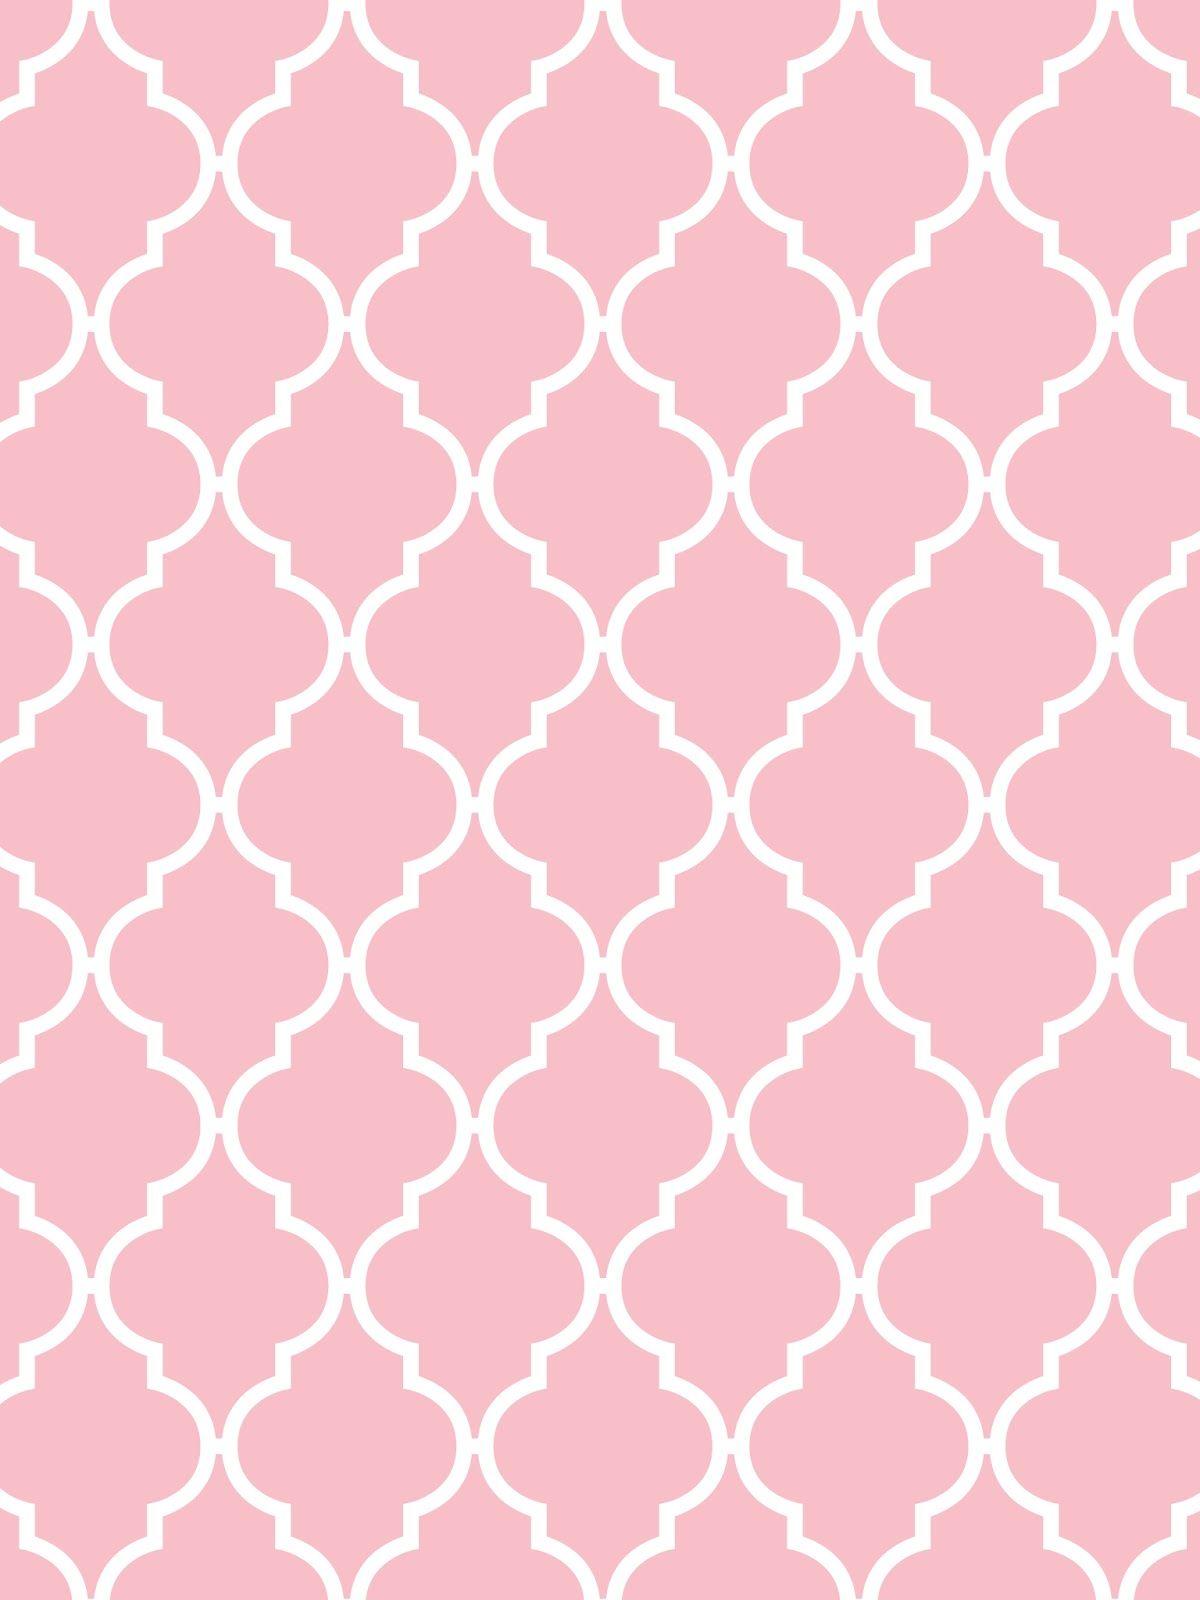 twitter backgrounds love pink